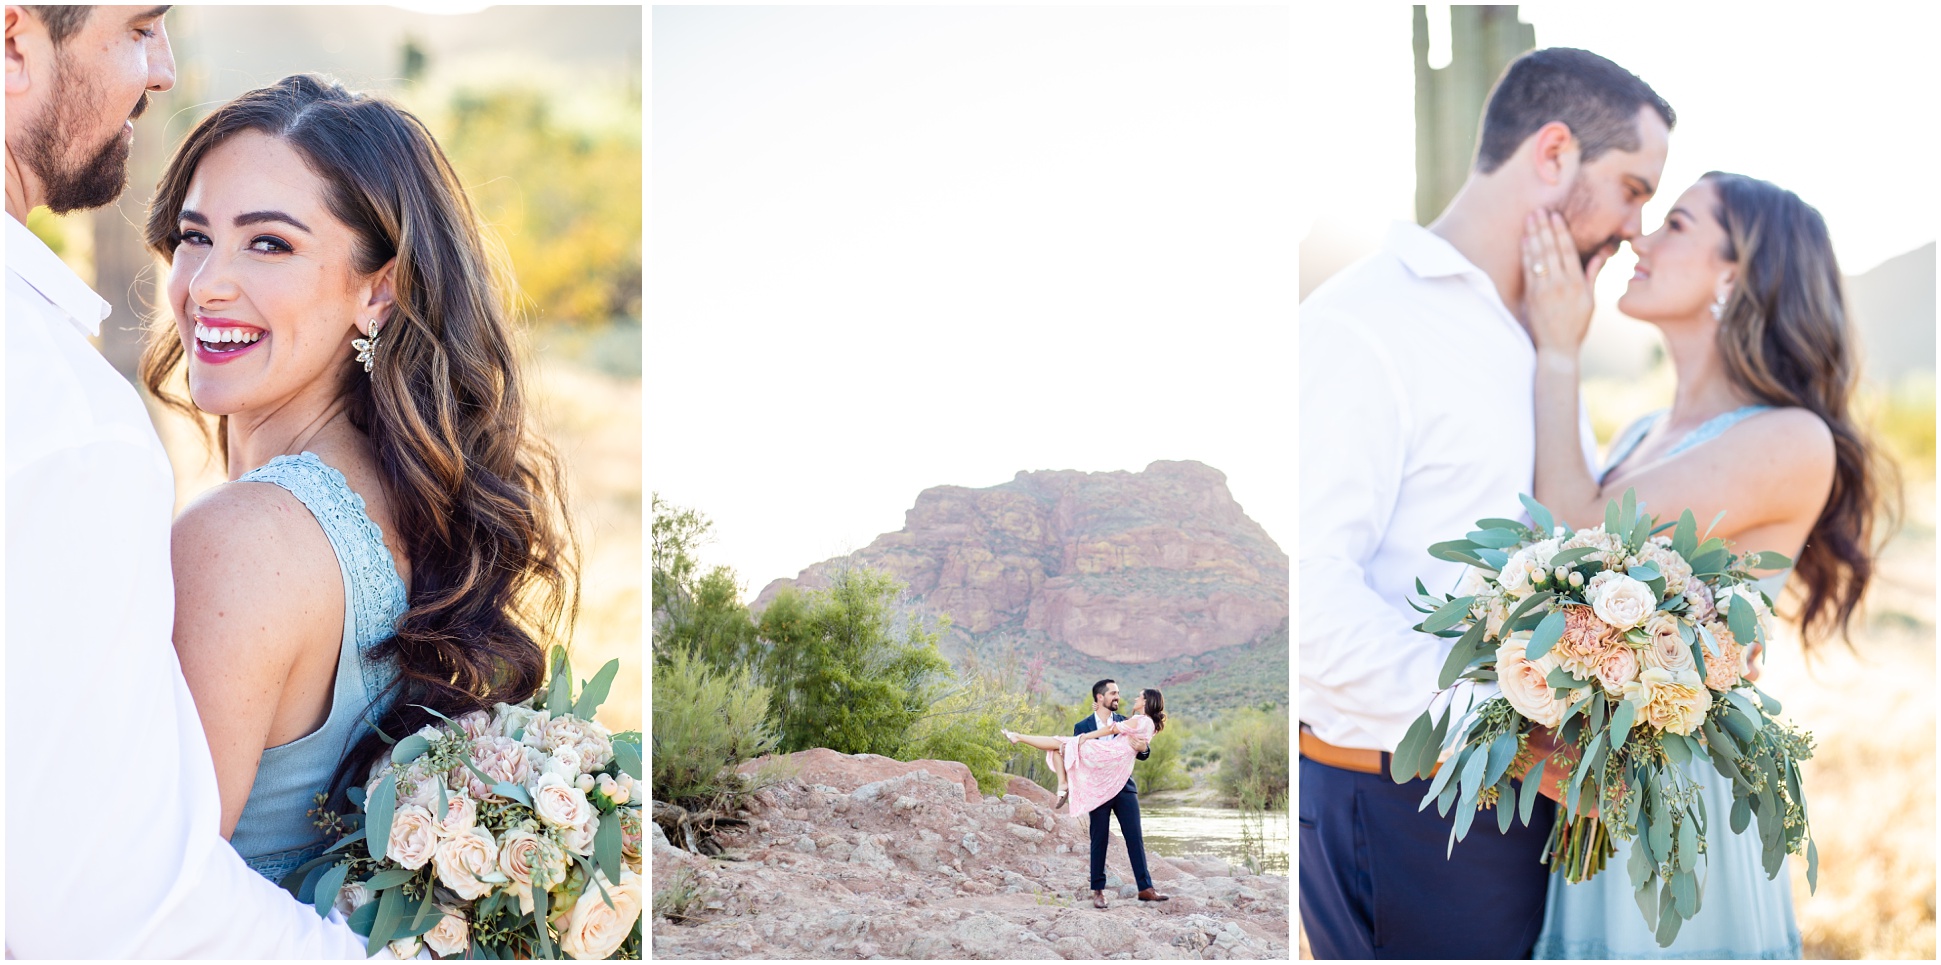 Three Images from Paul and Anette De La Rosa's Anniversary Session